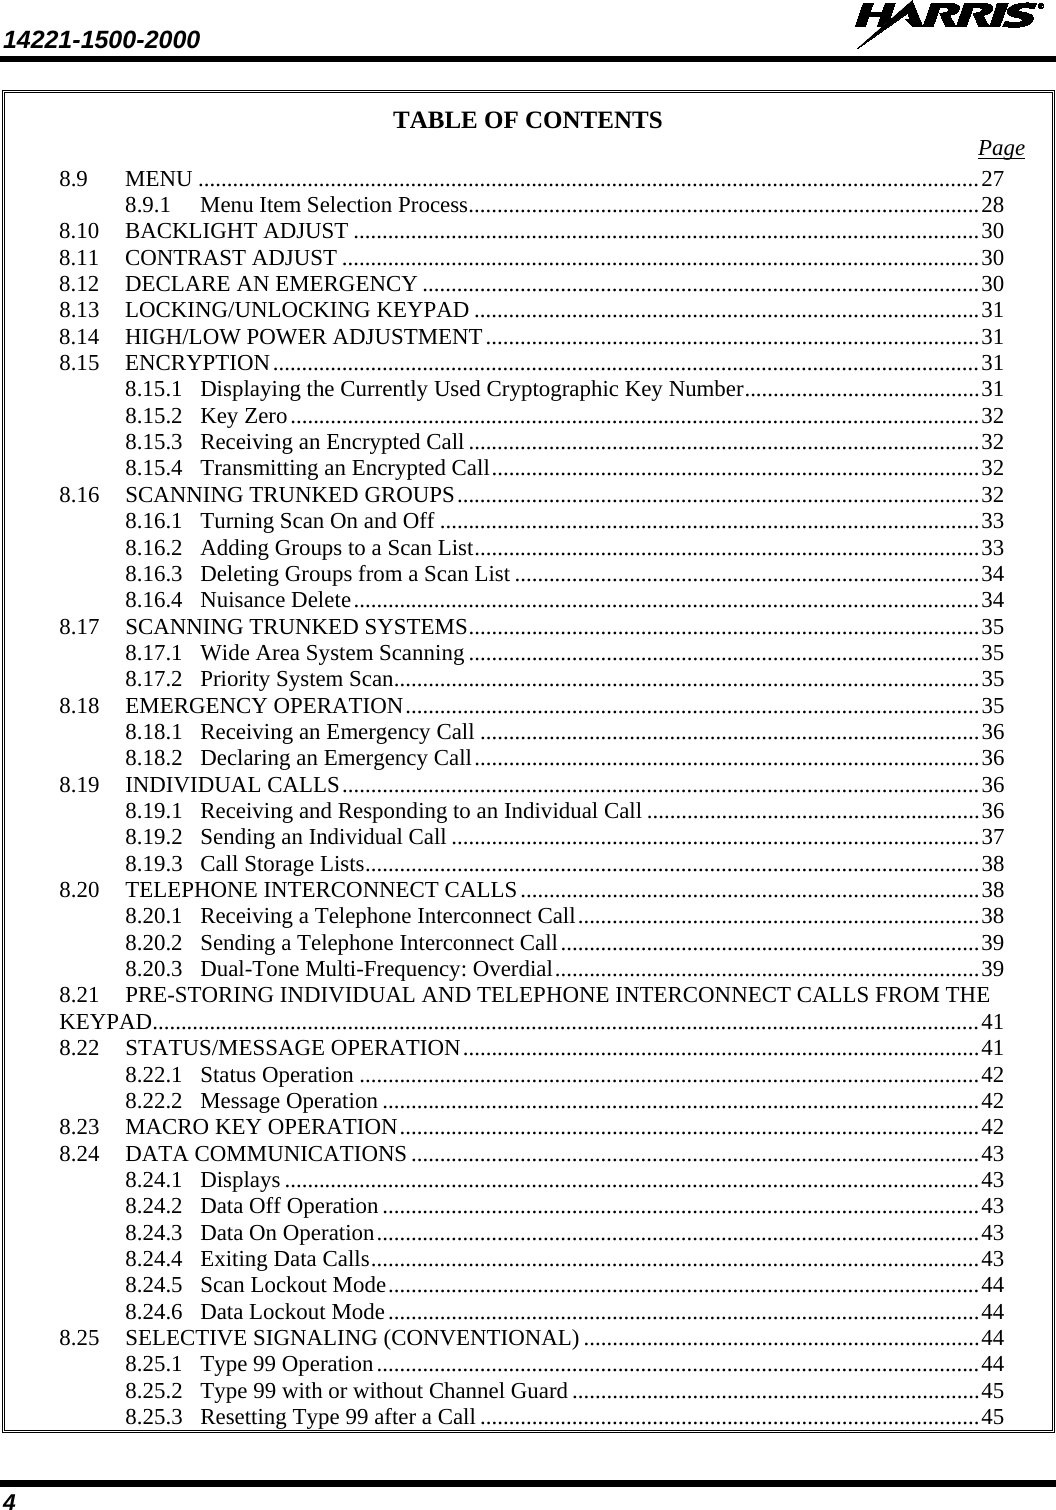 14221-1500-2000   4 TABLE OF CONTENTS Page 8.9 MENU ........................................................................................................................................ 27 8.9.1 Menu Item Selection Process ......................................................................................... 28 8.10 BACKLIGHT ADJUST ............................................................................................................. 30 8.11 CONTRAST ADJUST ............................................................................................................... 30 8.12 DECLARE AN EMERGENCY ................................................................................................. 30 8.13 LOCKING/UNLOCKING KEYPAD ........................................................................................ 31 8.14 HIGH/LOW POWER ADJUSTMENT ...................................................................................... 31 8.15 ENCRYPTION ........................................................................................................................... 31 8.15.1 Displaying the Currently Used Cryptographic Key Number ......................................... 31 8.15.2 Key Zero ........................................................................................................................ 32 8.15.3 Receiving an Encrypted Call ......................................................................................... 32 8.15.4 Transmitting an Encrypted Call ..................................................................................... 32 8.16 SCANNING TRUNKED GROUPS ........................................................................................... 32 8.16.1 Turning Scan On and Off .............................................................................................. 33 8.16.2 Adding Groups to a Scan List ........................................................................................ 33 8.16.3 Deleting Groups from a Scan List ................................................................................. 34 8.16.4 Nuisance Delete ............................................................................................................. 34 8.17 SCANNING TRUNKED SYSTEMS ......................................................................................... 35 8.17.1 Wide Area System Scanning ......................................................................................... 35 8.17.2 Priority System Scan...................................................................................................... 35 8.18 EMERGENCY OPERATION .................................................................................................... 35 8.18.1 Receiving an Emergency Call ....................................................................................... 36 8.18.2 Declaring an Emergency Call ........................................................................................ 36 8.19 INDIVIDUAL CALLS ............................................................................................................... 36 8.19.1 Receiving and Responding to an Individual Call .......................................................... 36 8.19.2 Sending an Individual Call ............................................................................................ 37 8.19.3 Call Storage Lists ........................................................................................................... 38 8.20 TELEPHONE INTERCONNECT CALLS ................................................................................ 38 8.20.1 Receiving a Telephone Interconnect Call ...................................................................... 38 8.20.2 Sending a Telephone Interconnect Call ......................................................................... 39 8.20.3 Dual-Tone Multi-Frequency: Overdial .......................................................................... 39 8.21 PRE-STORING INDIVIDUAL AND TELEPHONE INTERCONNECT CALLS FROM THE KEYPAD................................................................................................................................................ 41 8.22 STATUS/MESSAGE OPERATION .......................................................................................... 41 8.22.1 Status Operation ............................................................................................................ 42 8.22.2 Message Operation ........................................................................................................ 42 8.23 MACRO KEY OPERATION ..................................................................................................... 42 8.24 DATA COMMUNICATIONS ................................................................................................... 43 8.24.1 Displays ......................................................................................................................... 43 8.24.2 Data Off Operation ........................................................................................................ 43 8.24.3 Data On Operation ......................................................................................................... 43 8.24.4 Exiting Data Calls .......................................................................................................... 43 8.24.5 Scan Lockout Mode ....................................................................................................... 44 8.24.6 Data Lockout Mode ....................................................................................................... 44 8.25 SELECTIVE SIGNALING (CONVENTIONAL) ..................................................................... 44 8.25.1 Type 99 Operation ......................................................................................................... 44 8.25.2 Type 99 with or without Channel Guard ....................................................................... 45 8.25.3 Resetting Type 99 after a Call ....................................................................................... 45 